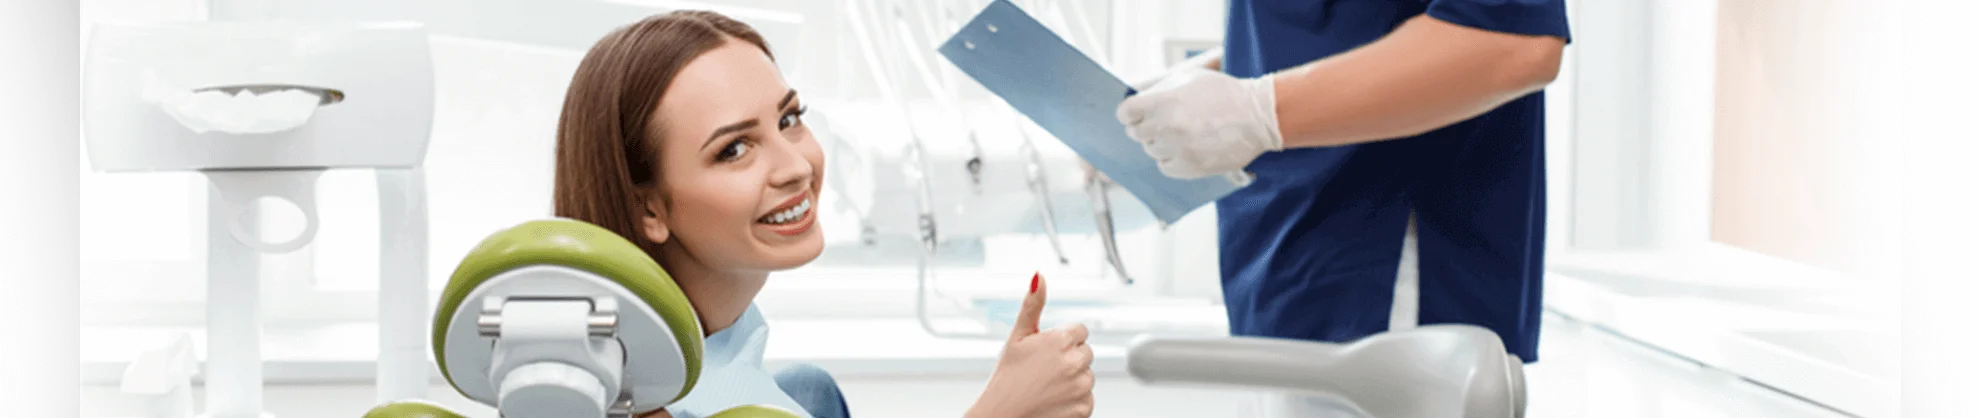 root canal treatment background